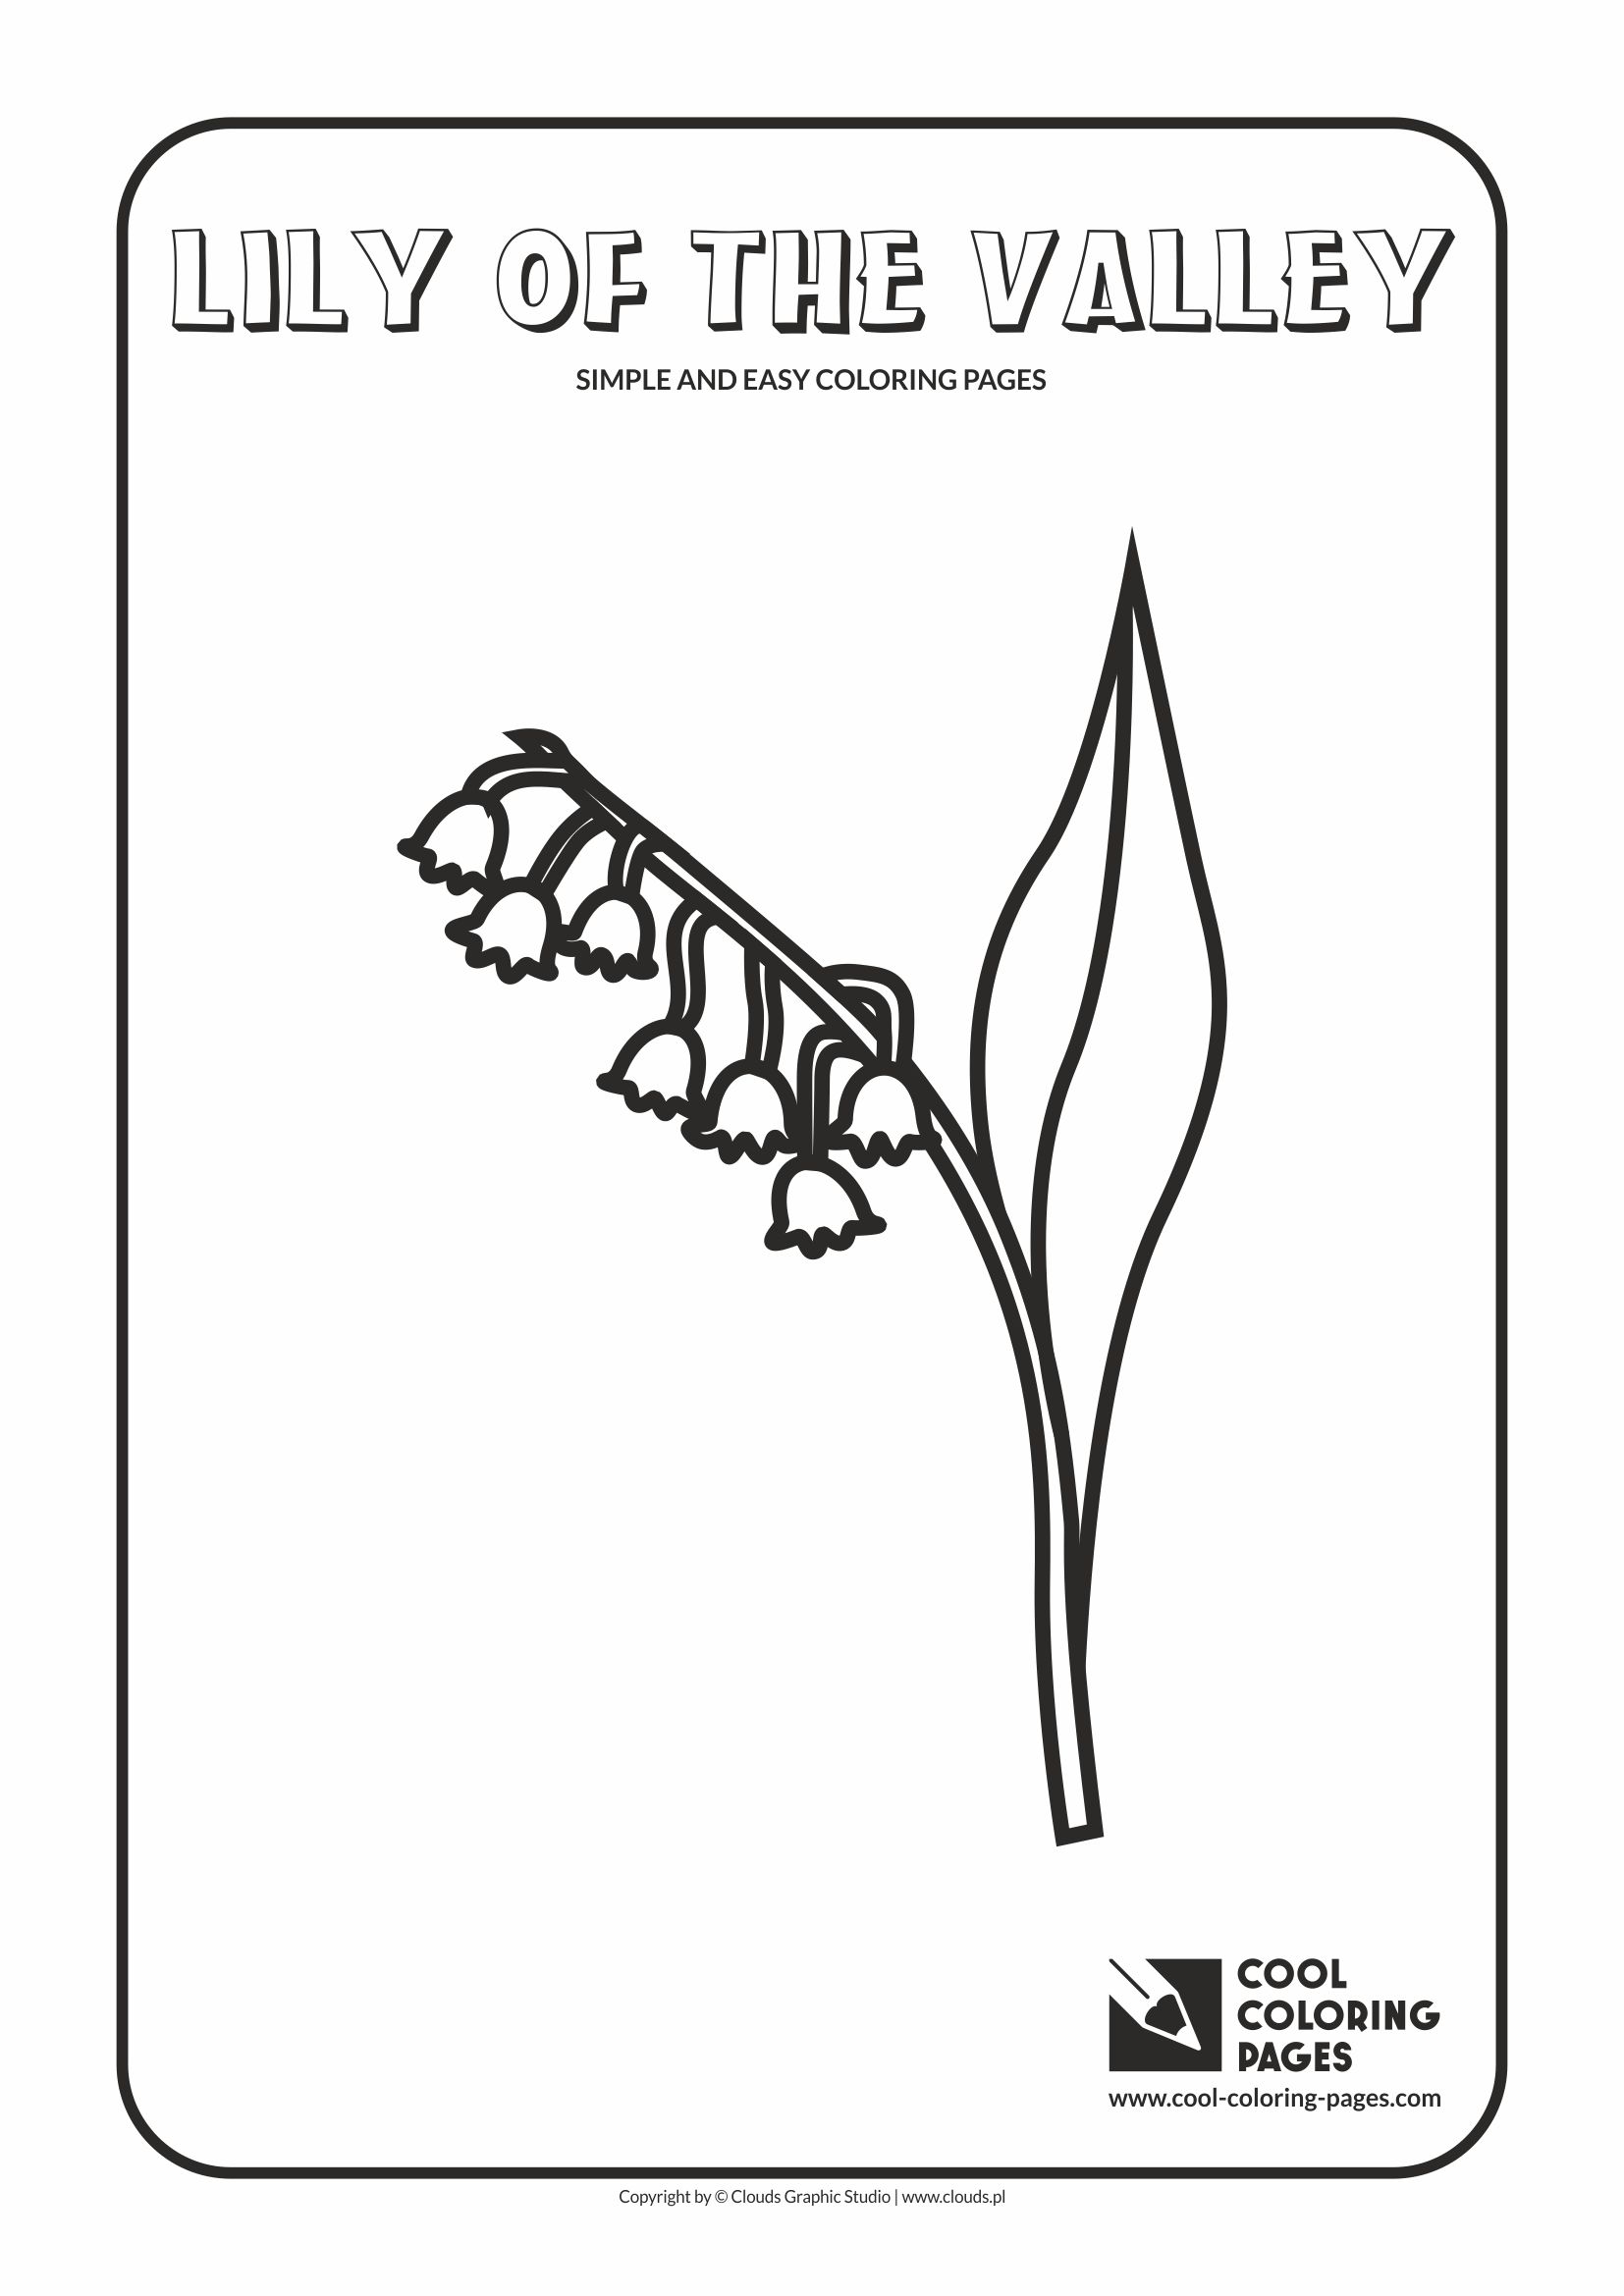 Simple and easy coloring pages for toddlers - Lily of the valley